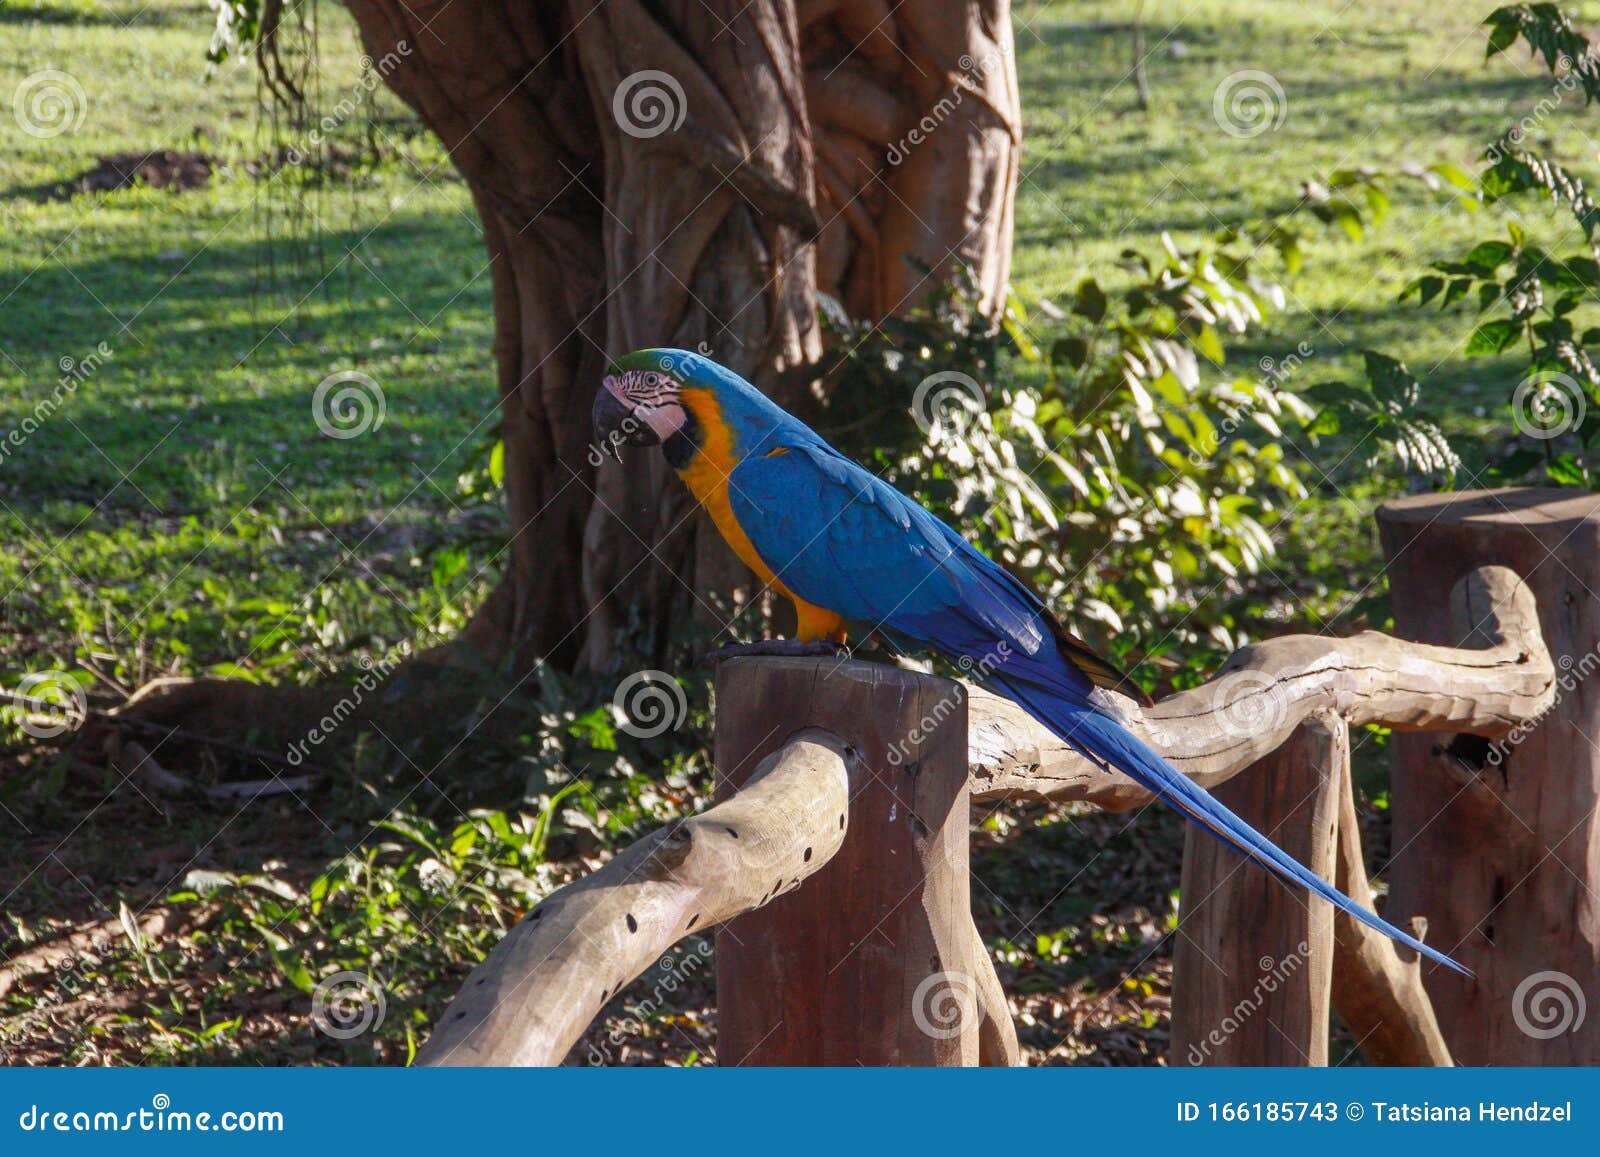 Large Multi-colored Talking Macaw Ara Parrot In The Rainforest Of Brazil  Stock Image - Image of colombia, avian: 166185743